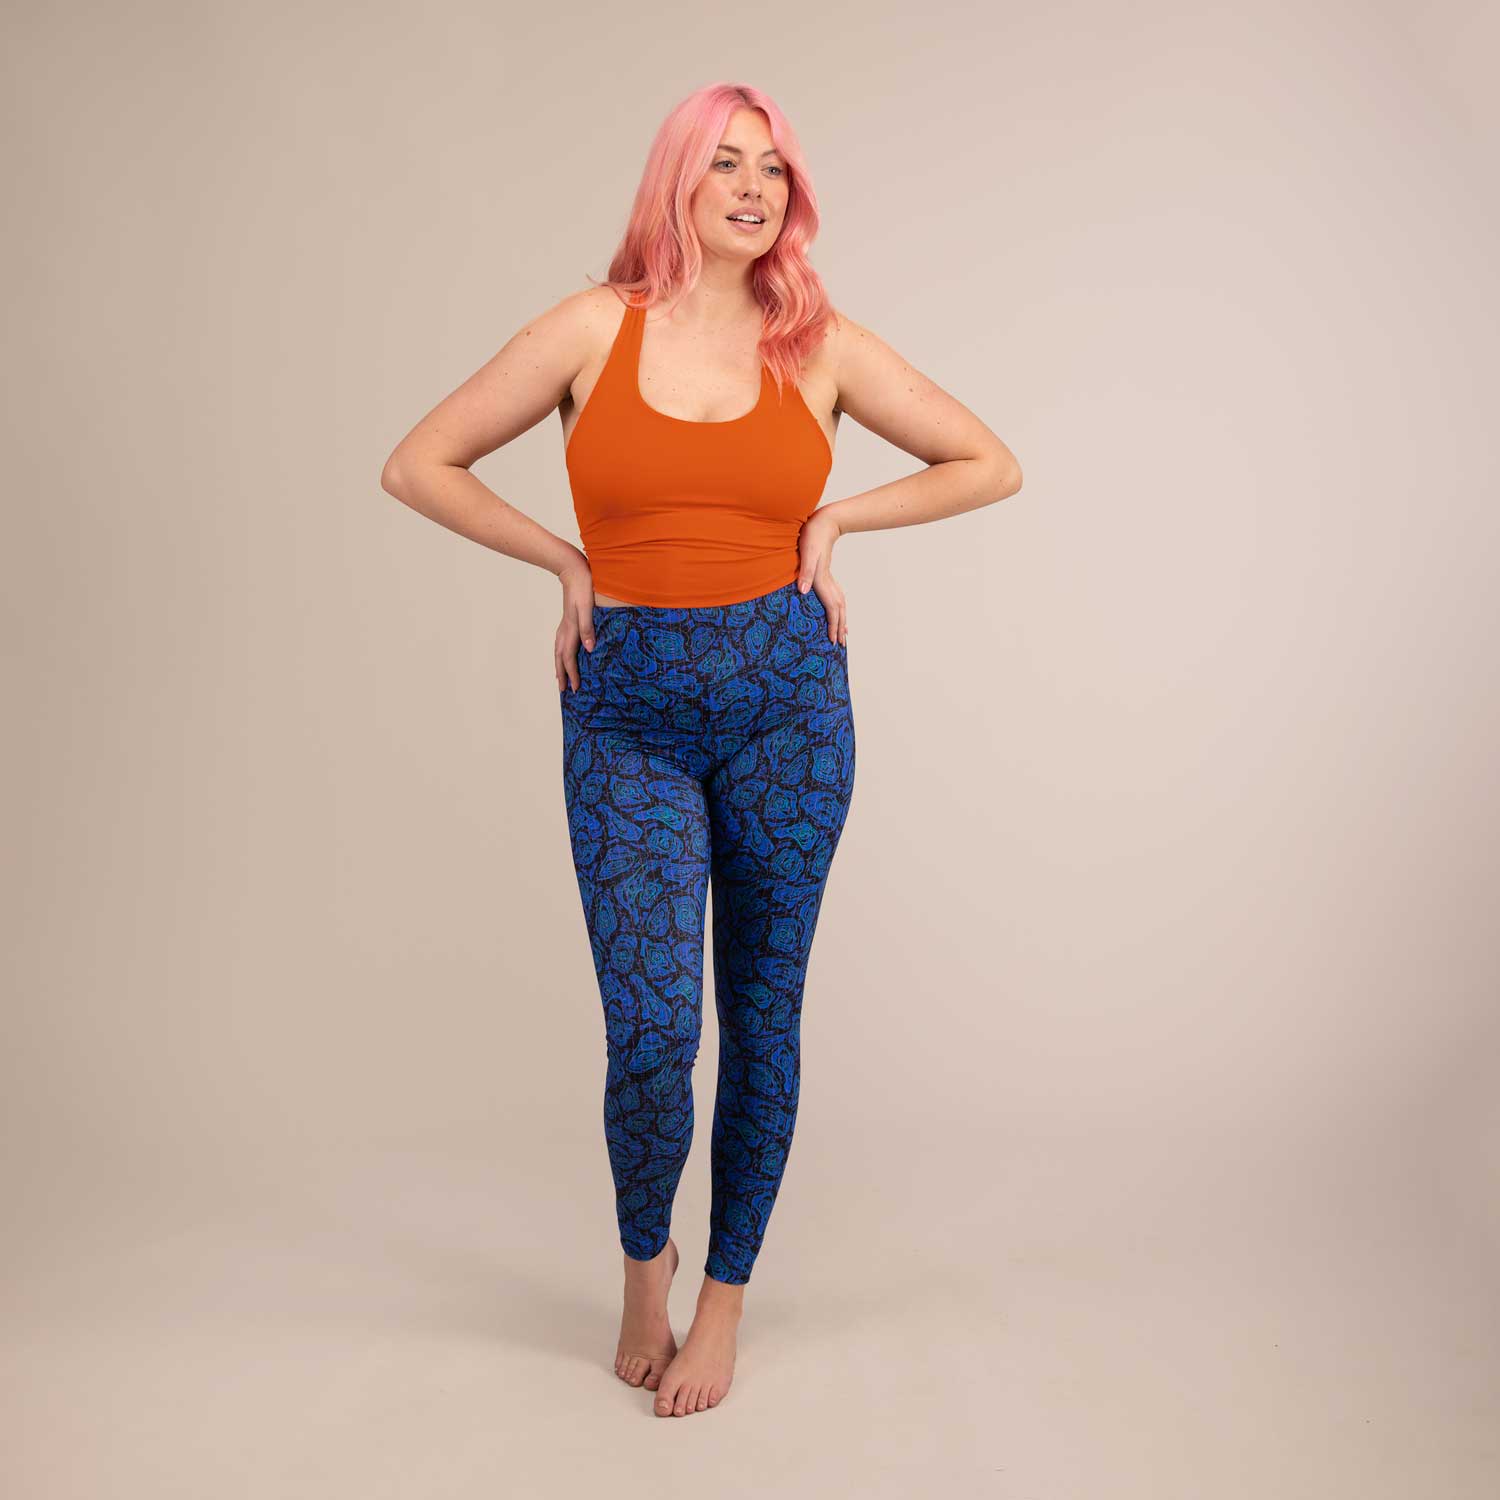 TITAN GEO JAGUAR LEGGINGS | Printed Recycled Leggings | 3RD ROCK Clothing -  Sophie is 5ft 9 with a 34" waist, 42" hips and wears a size 16 F